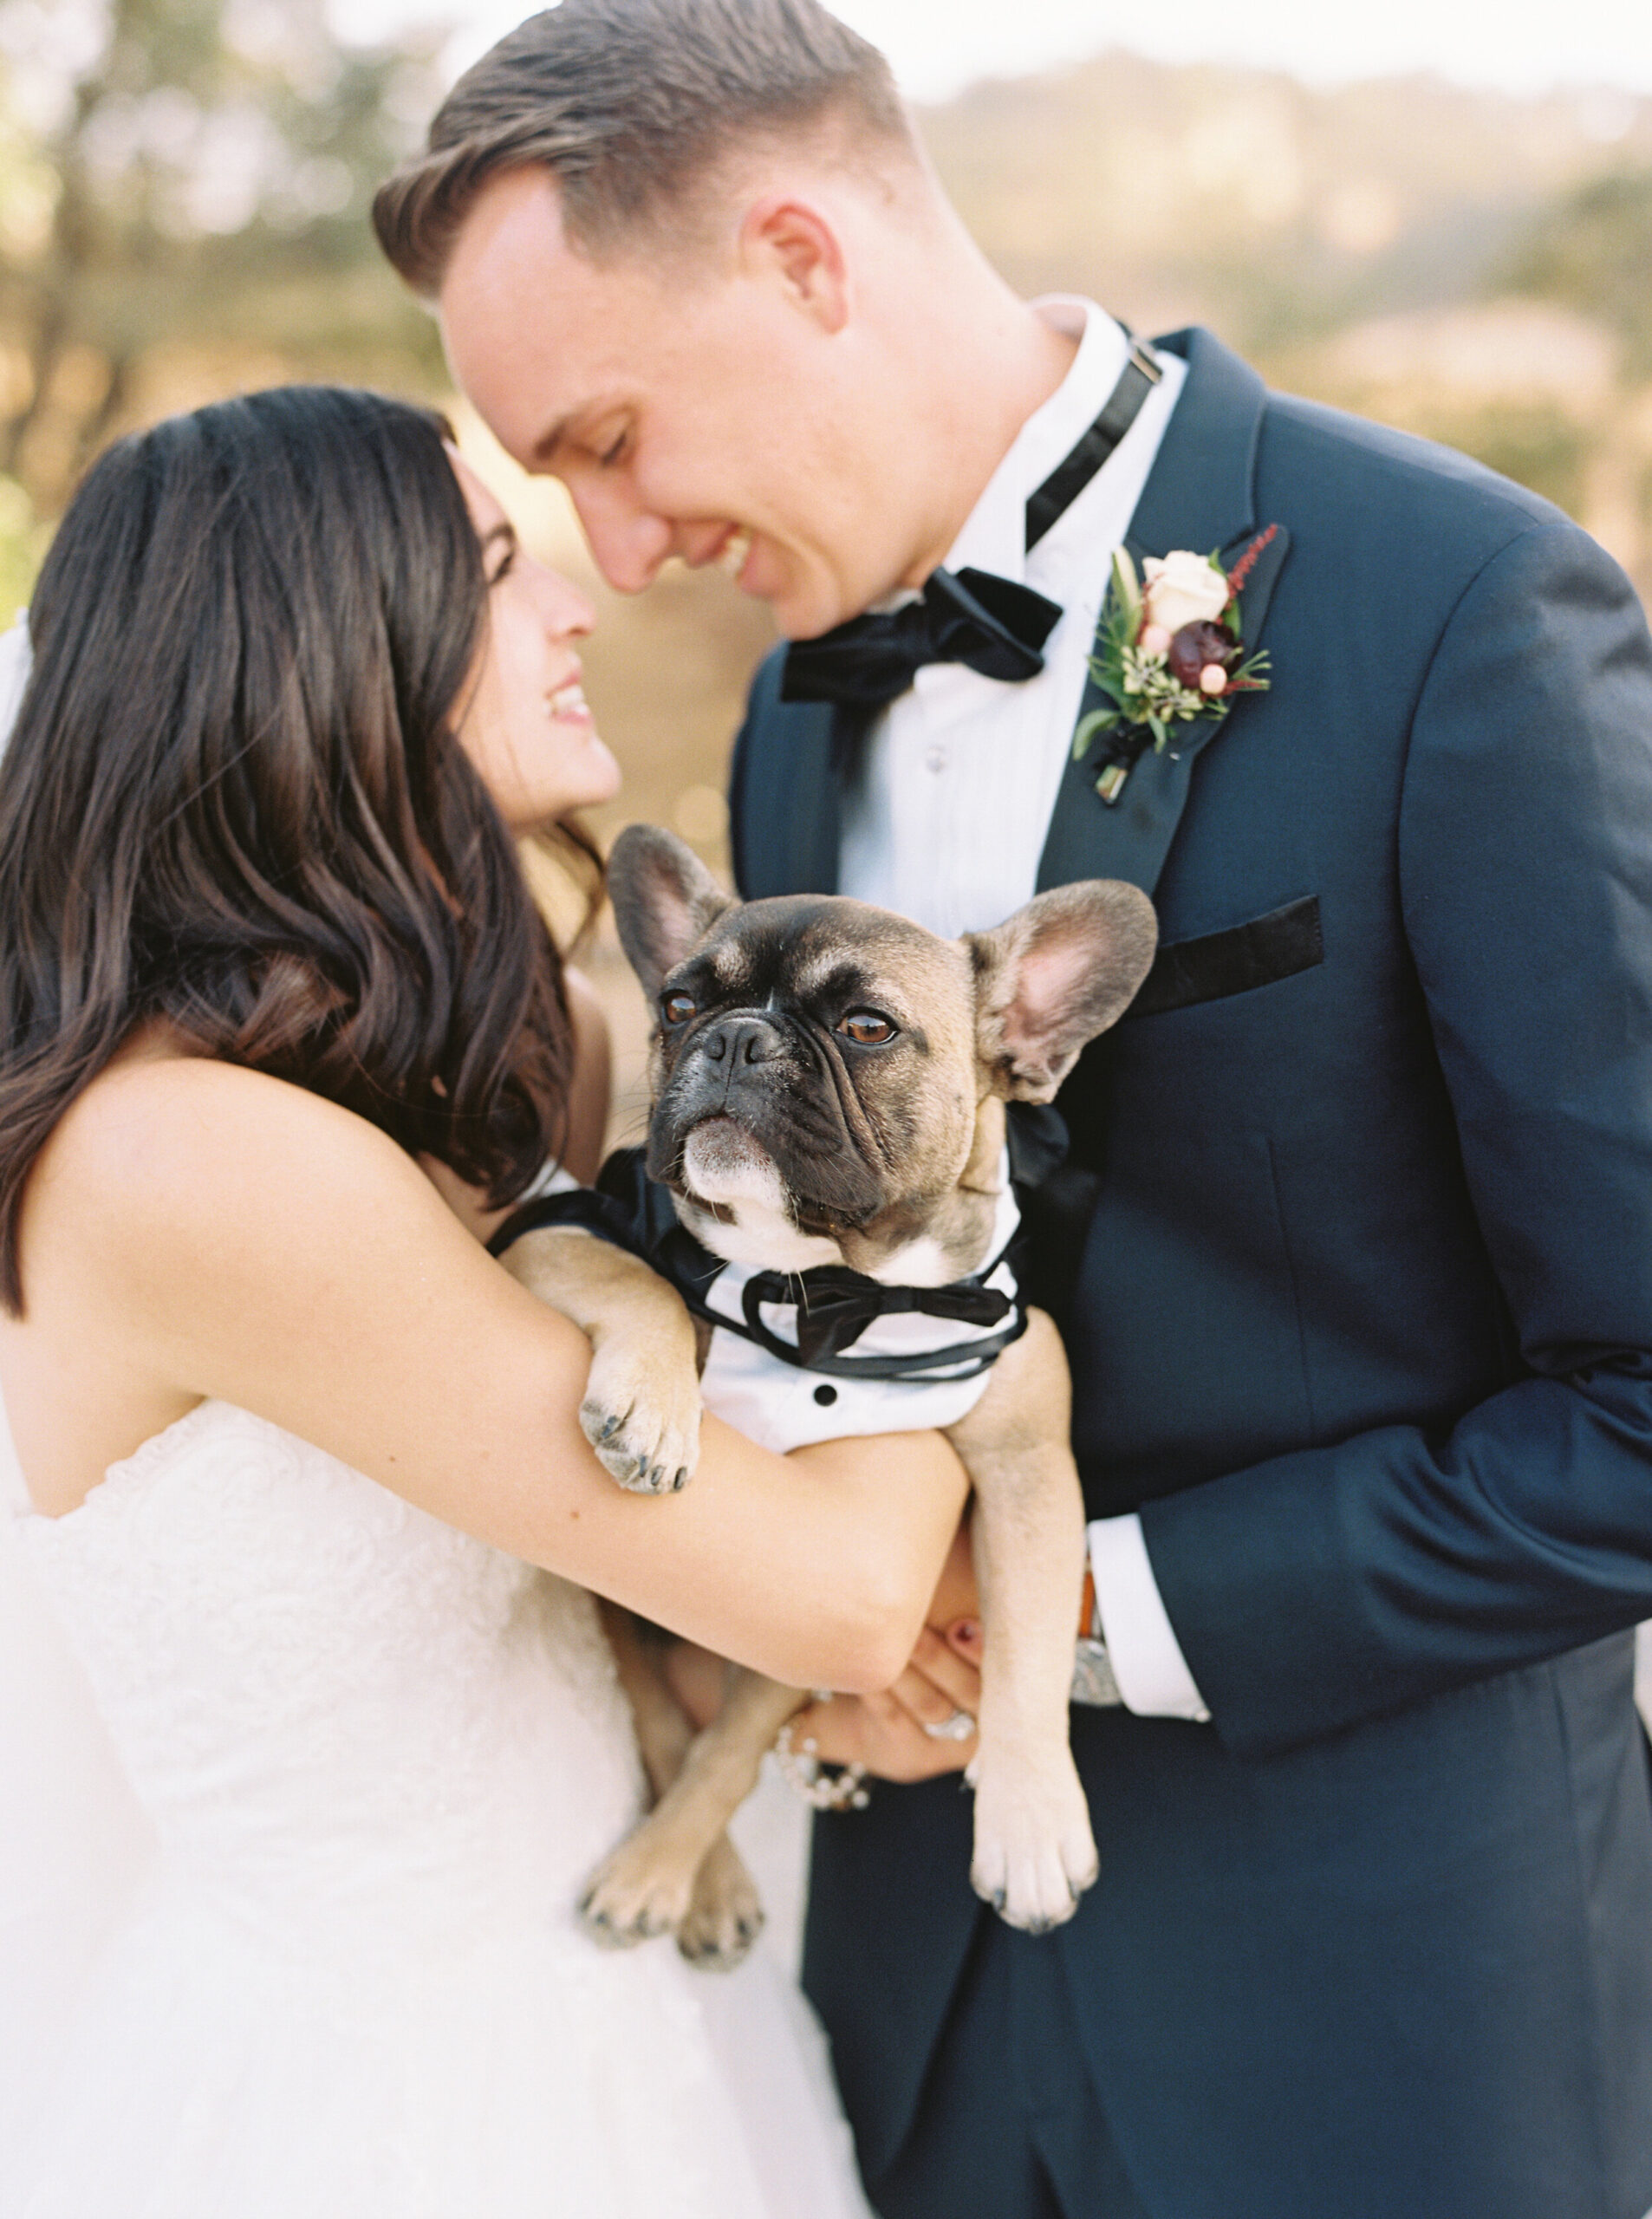 How to Include Your Dog in Your Engagement and Wedding